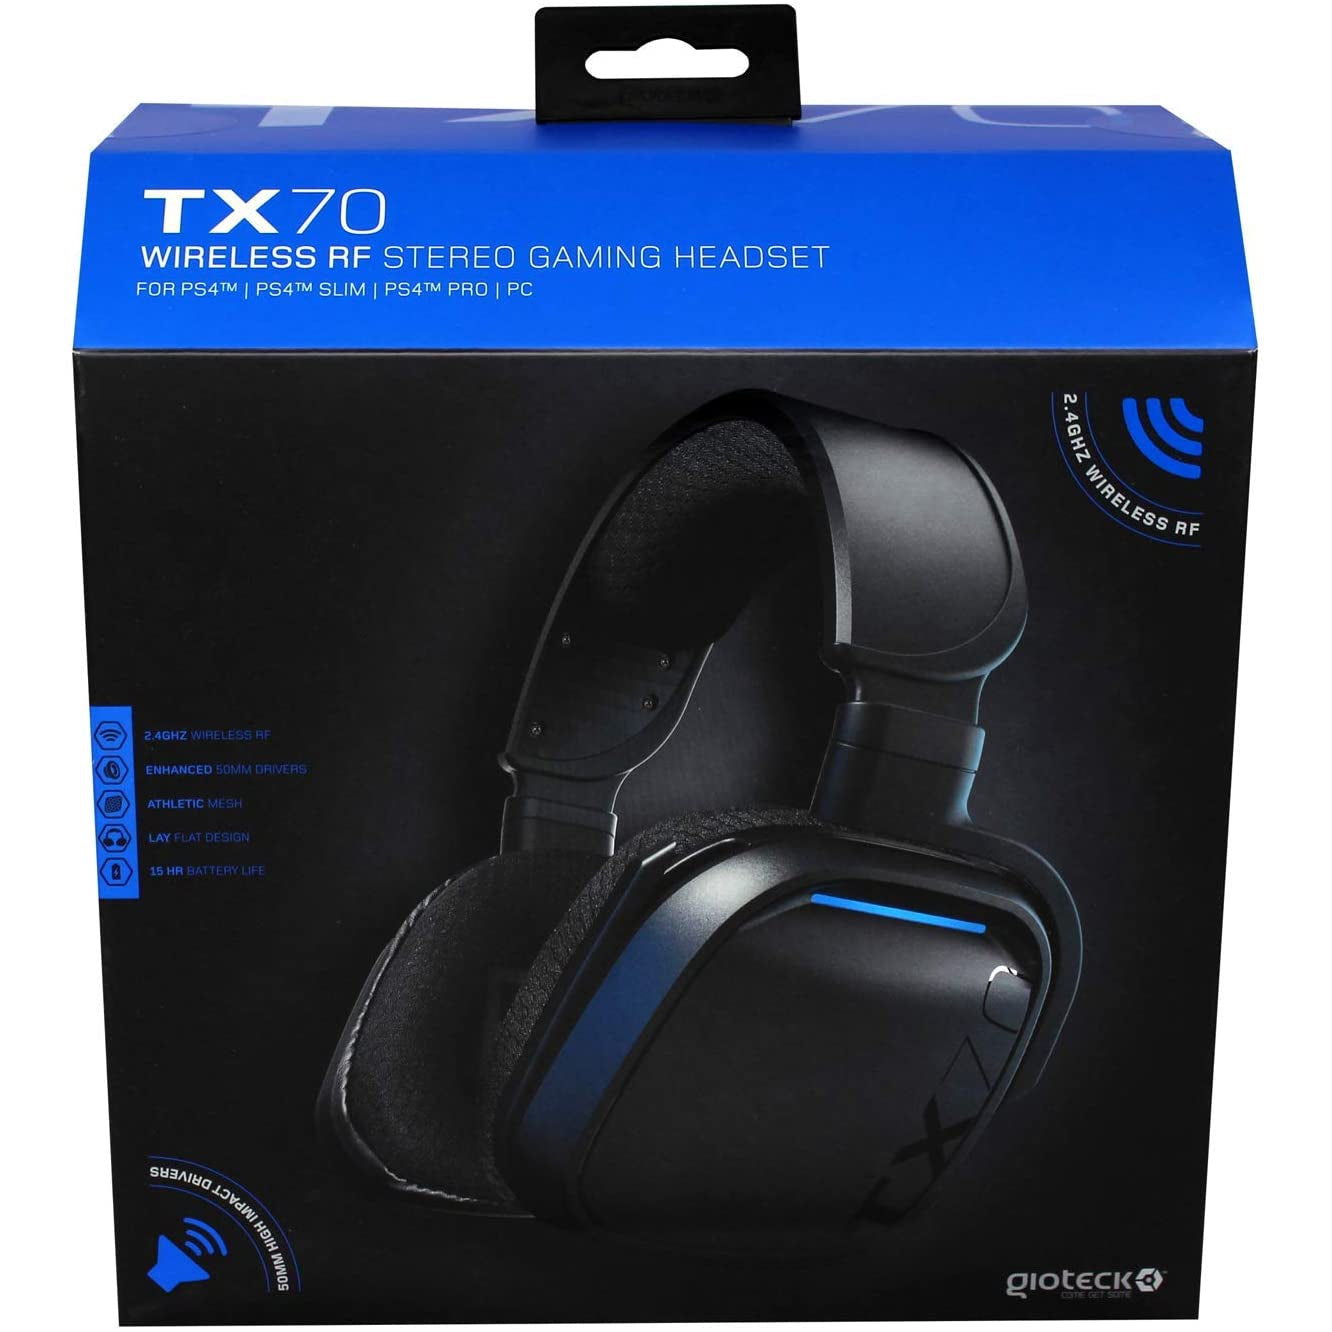 Gioteck TX70 Bluetooth RF Stereo Gaming Headset for PS4/PC - New